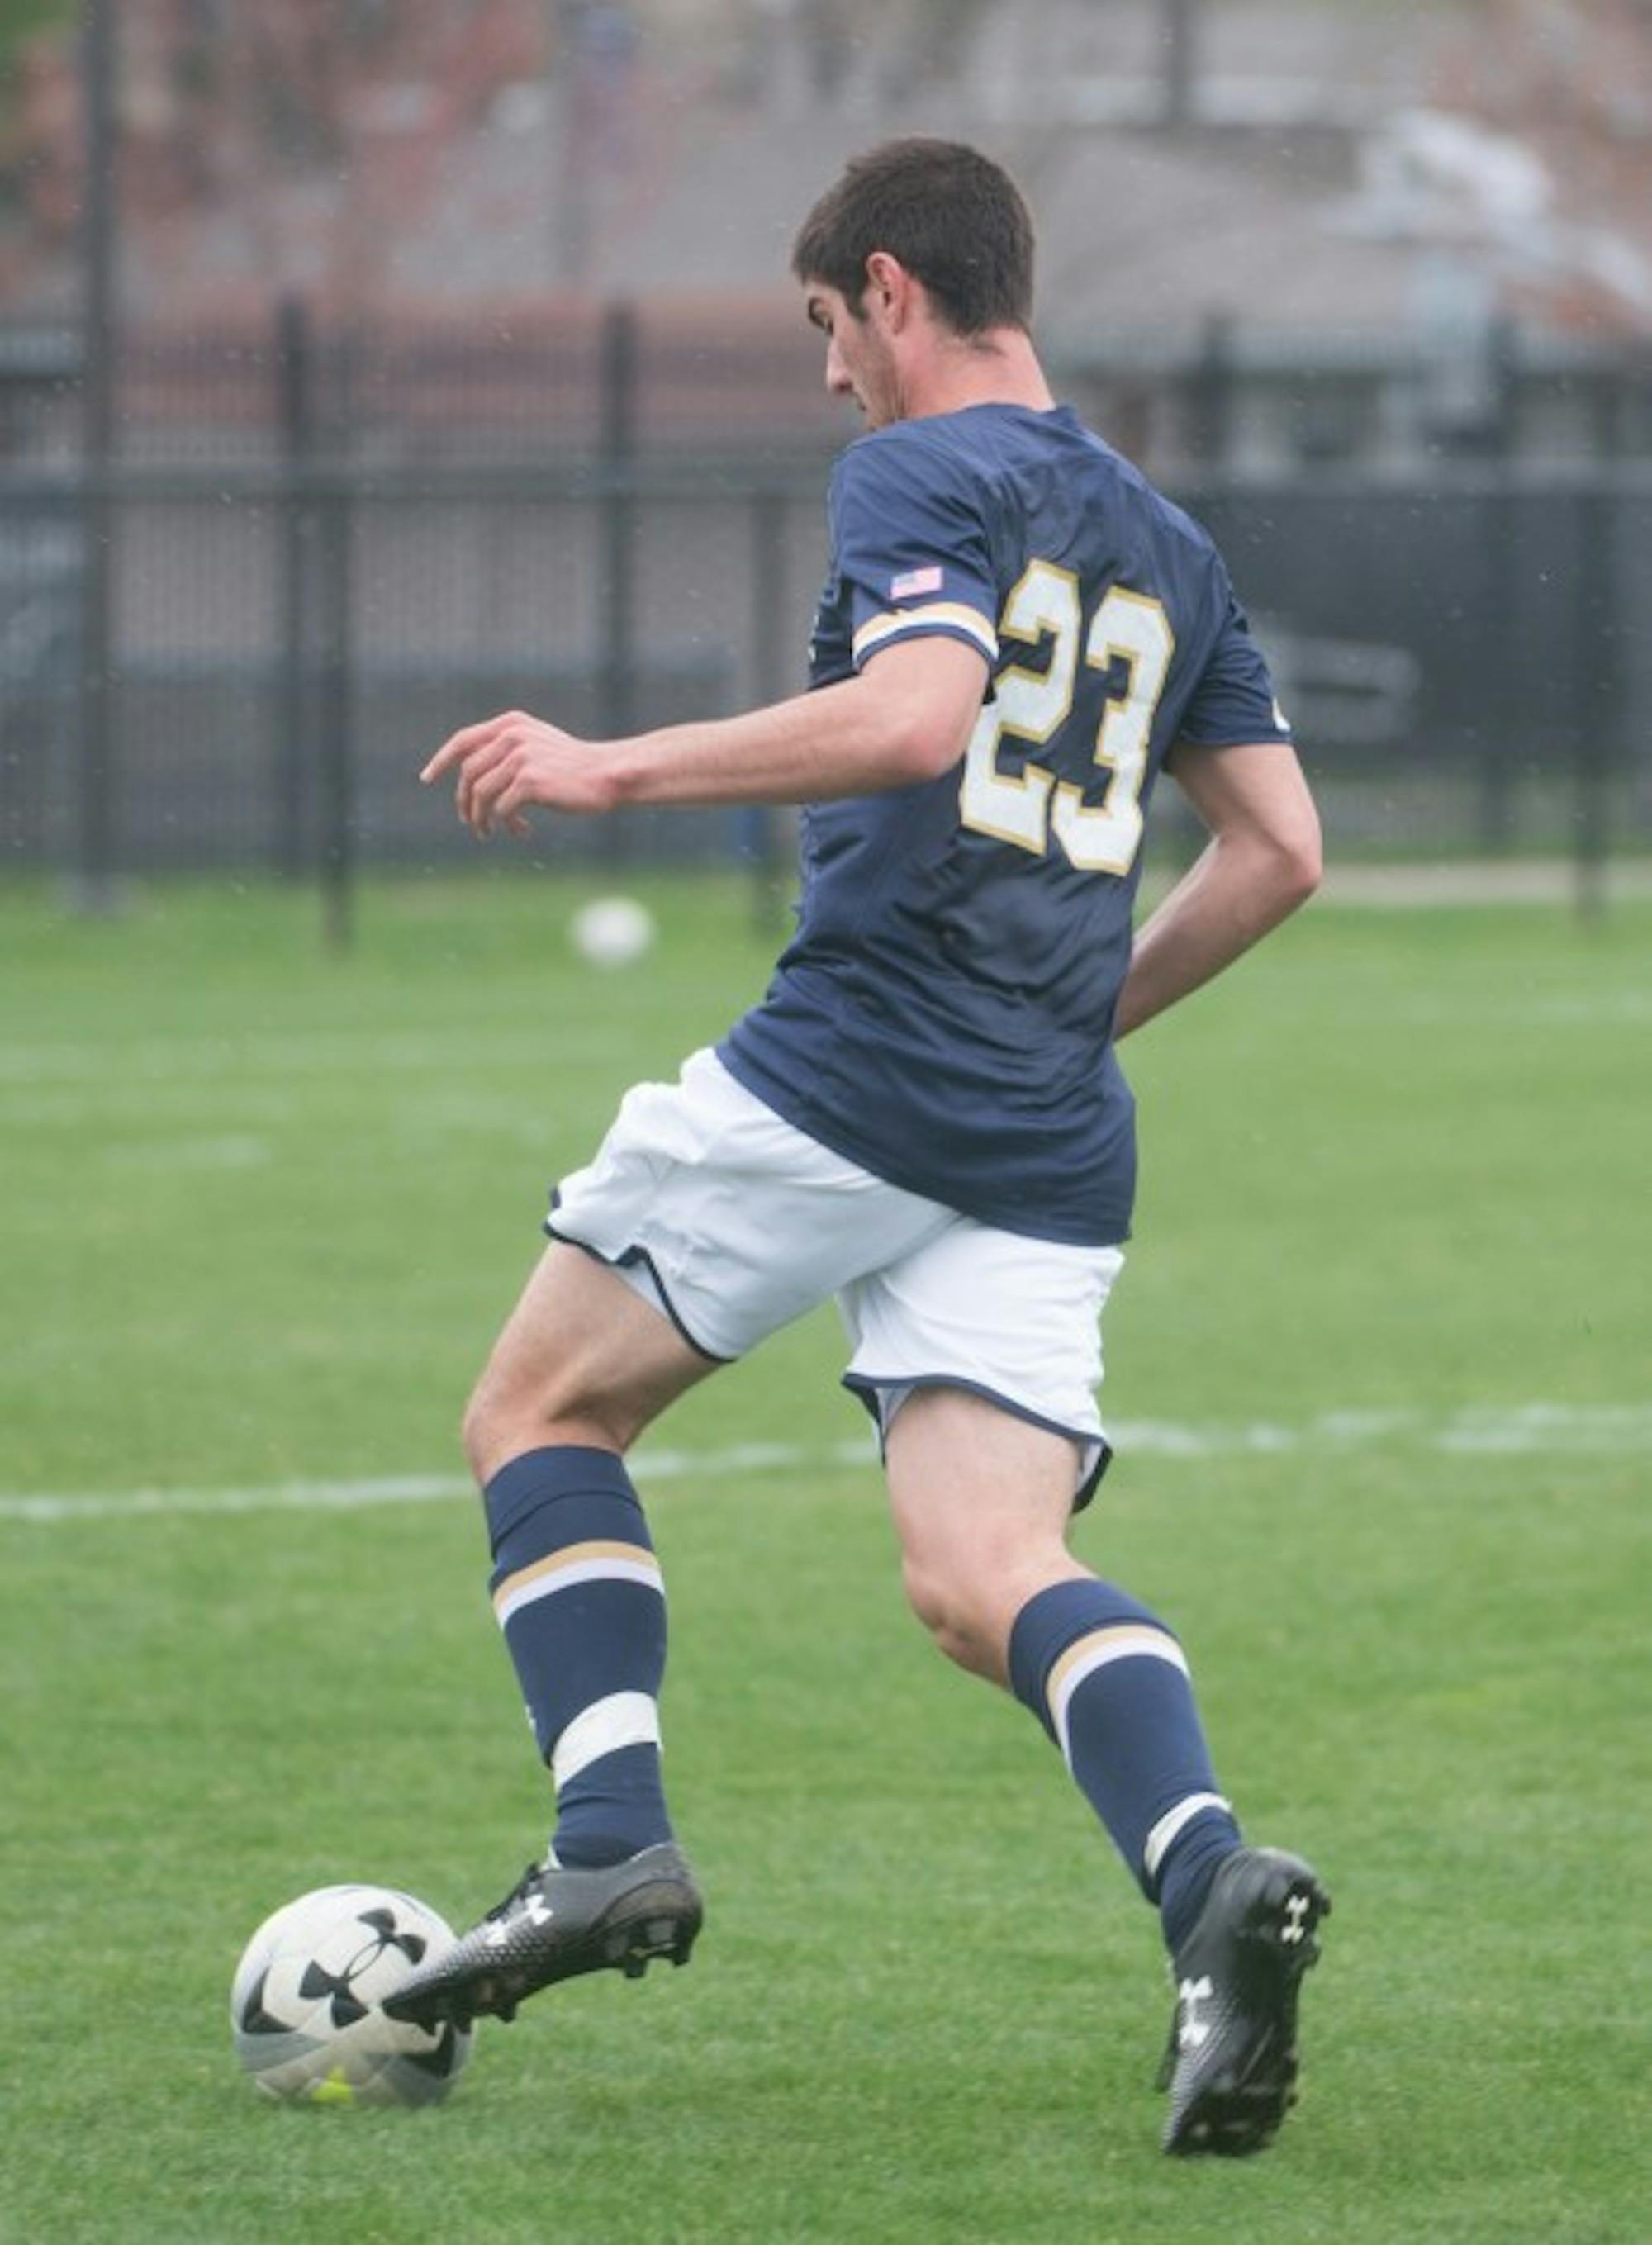 Sophomore forward Jeffrey Farina pushes the ball during a spring exhibition against Valparaiso on April 19 at Old Alumni Field.